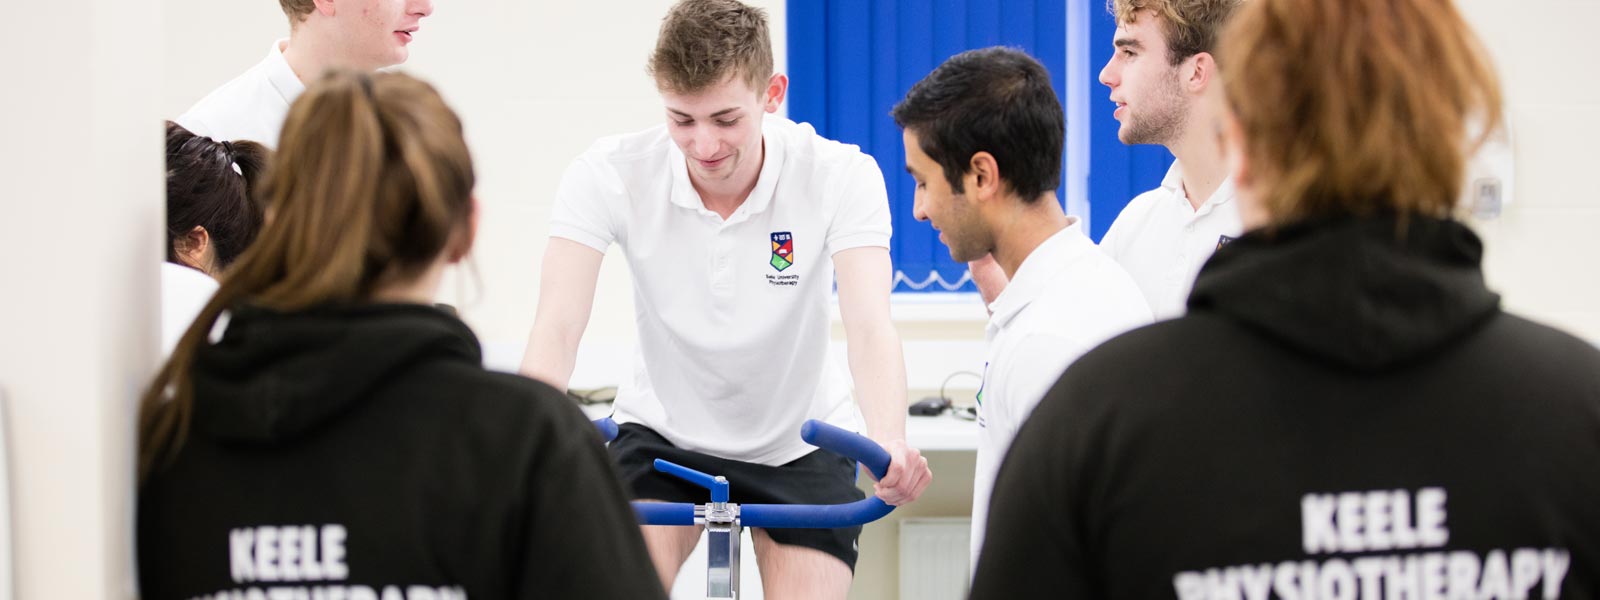 School of Health and Rehabilitation physiotherapy